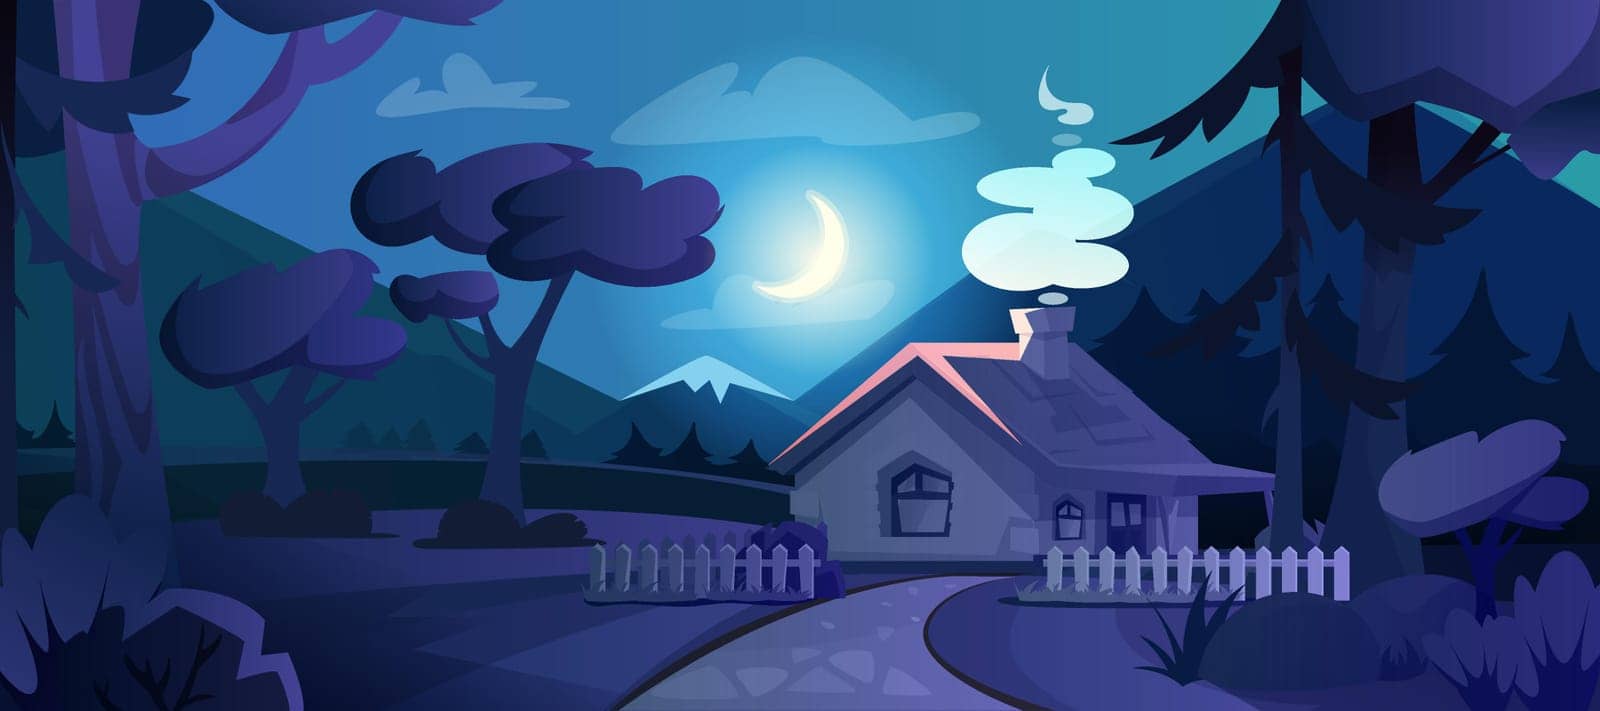 Cartoon country house with glow windows in night forest. Nature scene landscape of forester cottage with smoke from chimney, fence, road, mountains and moon in dark sky. Rural village under moonlight.